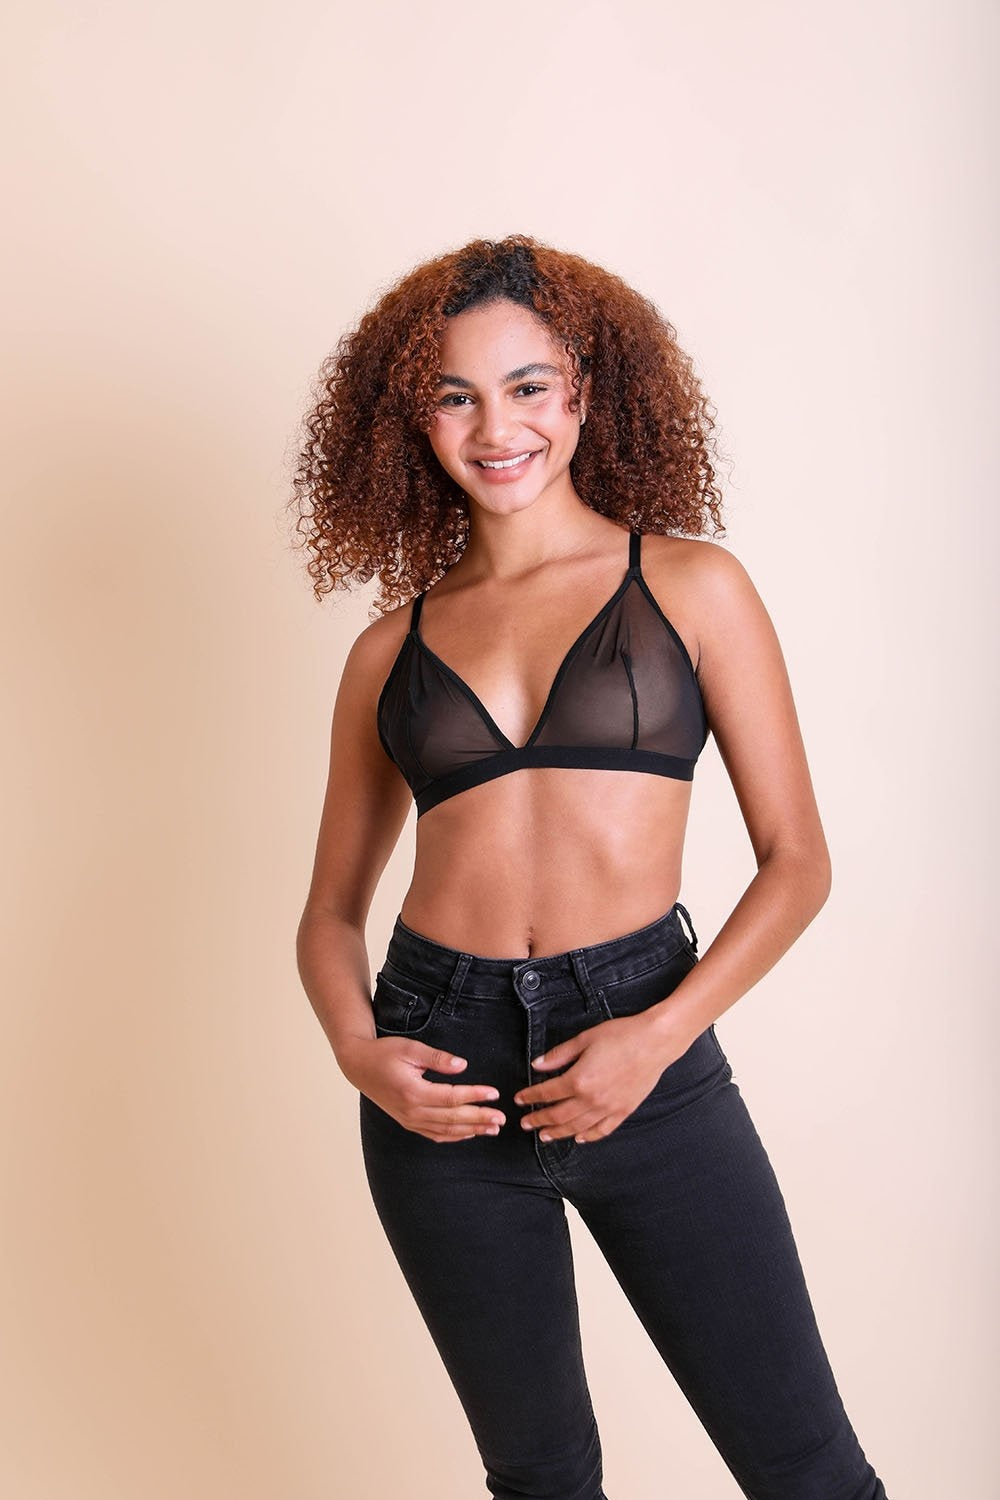 Leto Collection - Seamless Lace Strap Bralette $18 – Thank you